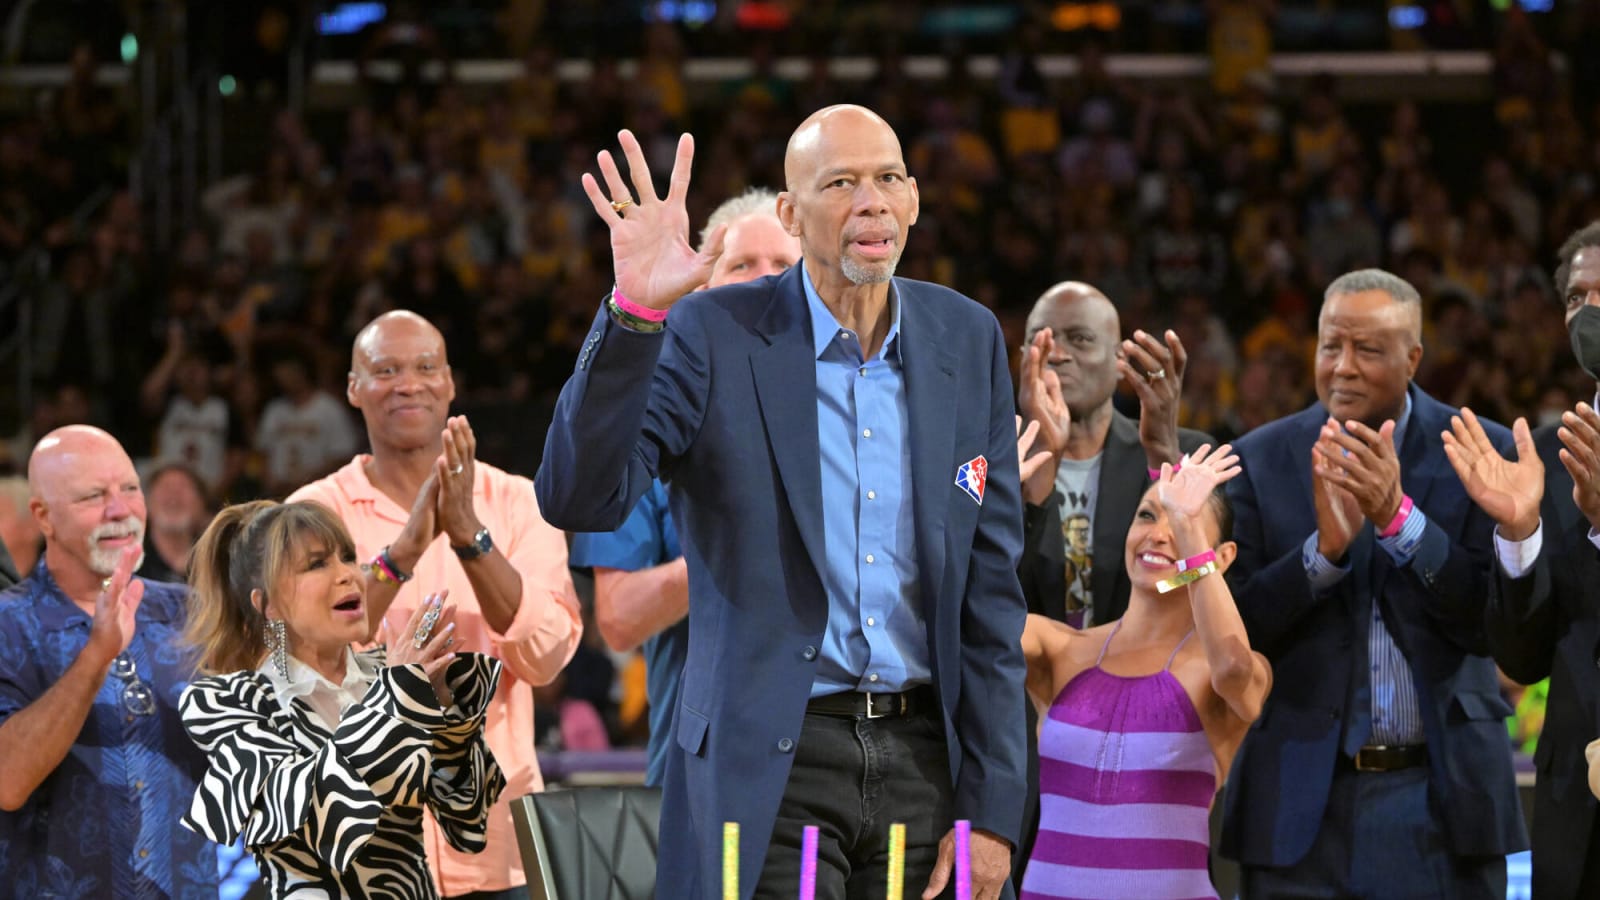 This Day In Lakers History: Kareem Abdul-Jabbar Passes Oscar Robertson On All-Time Scoring List